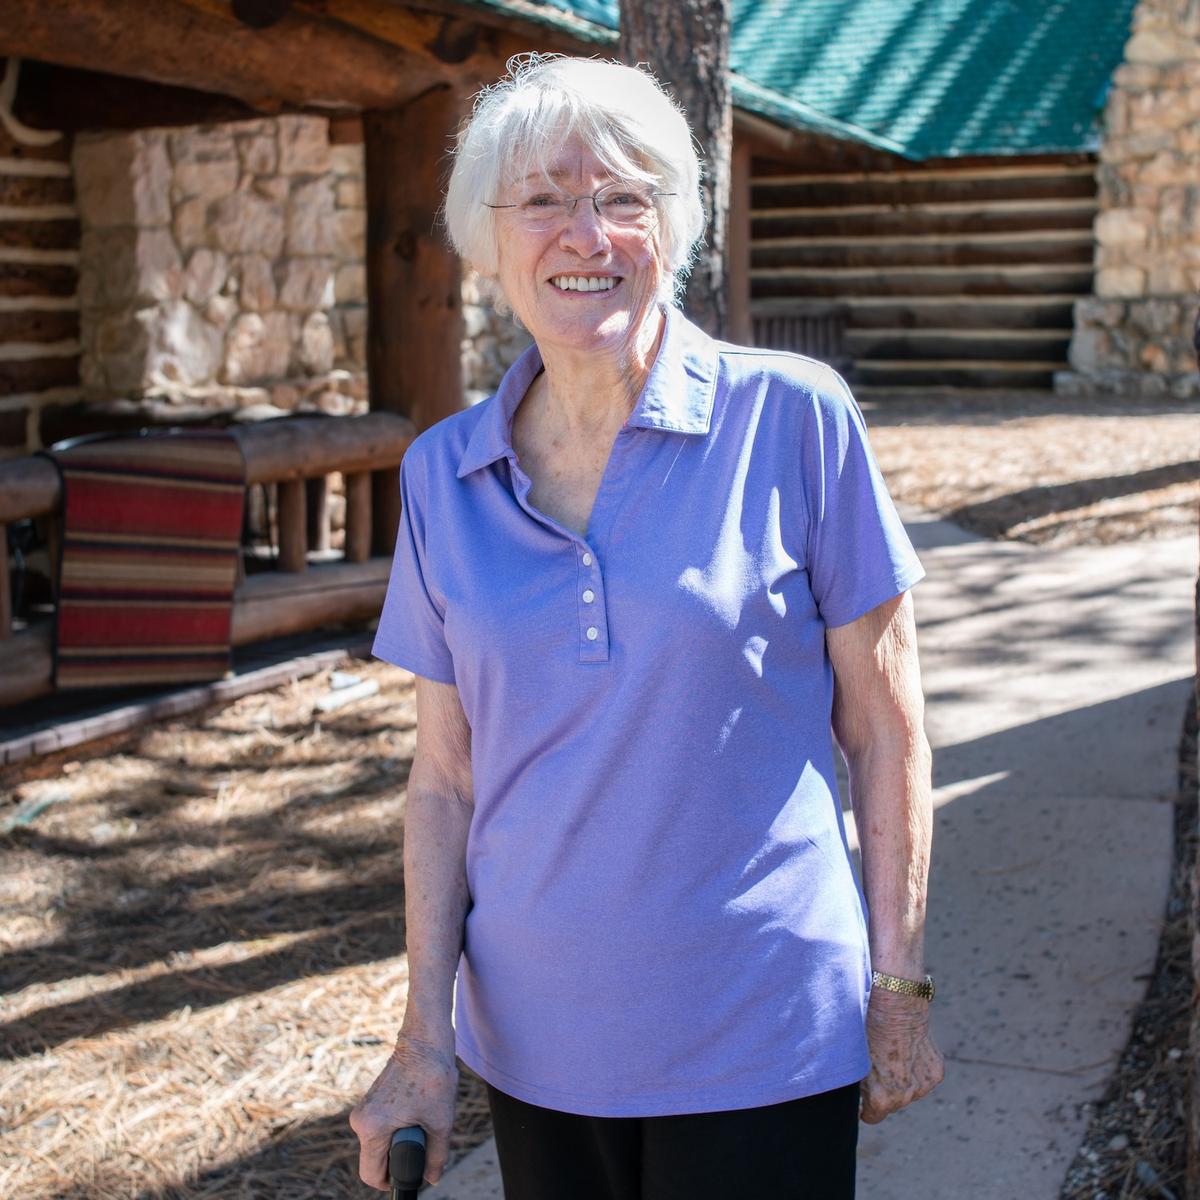 Elva Orton touring the deluxe cabins near the Bryce Lodge. (Courtesy of <a href="https://www.facebook.com/BryceCanyonnps">NPS</a>/Peter Densmore)